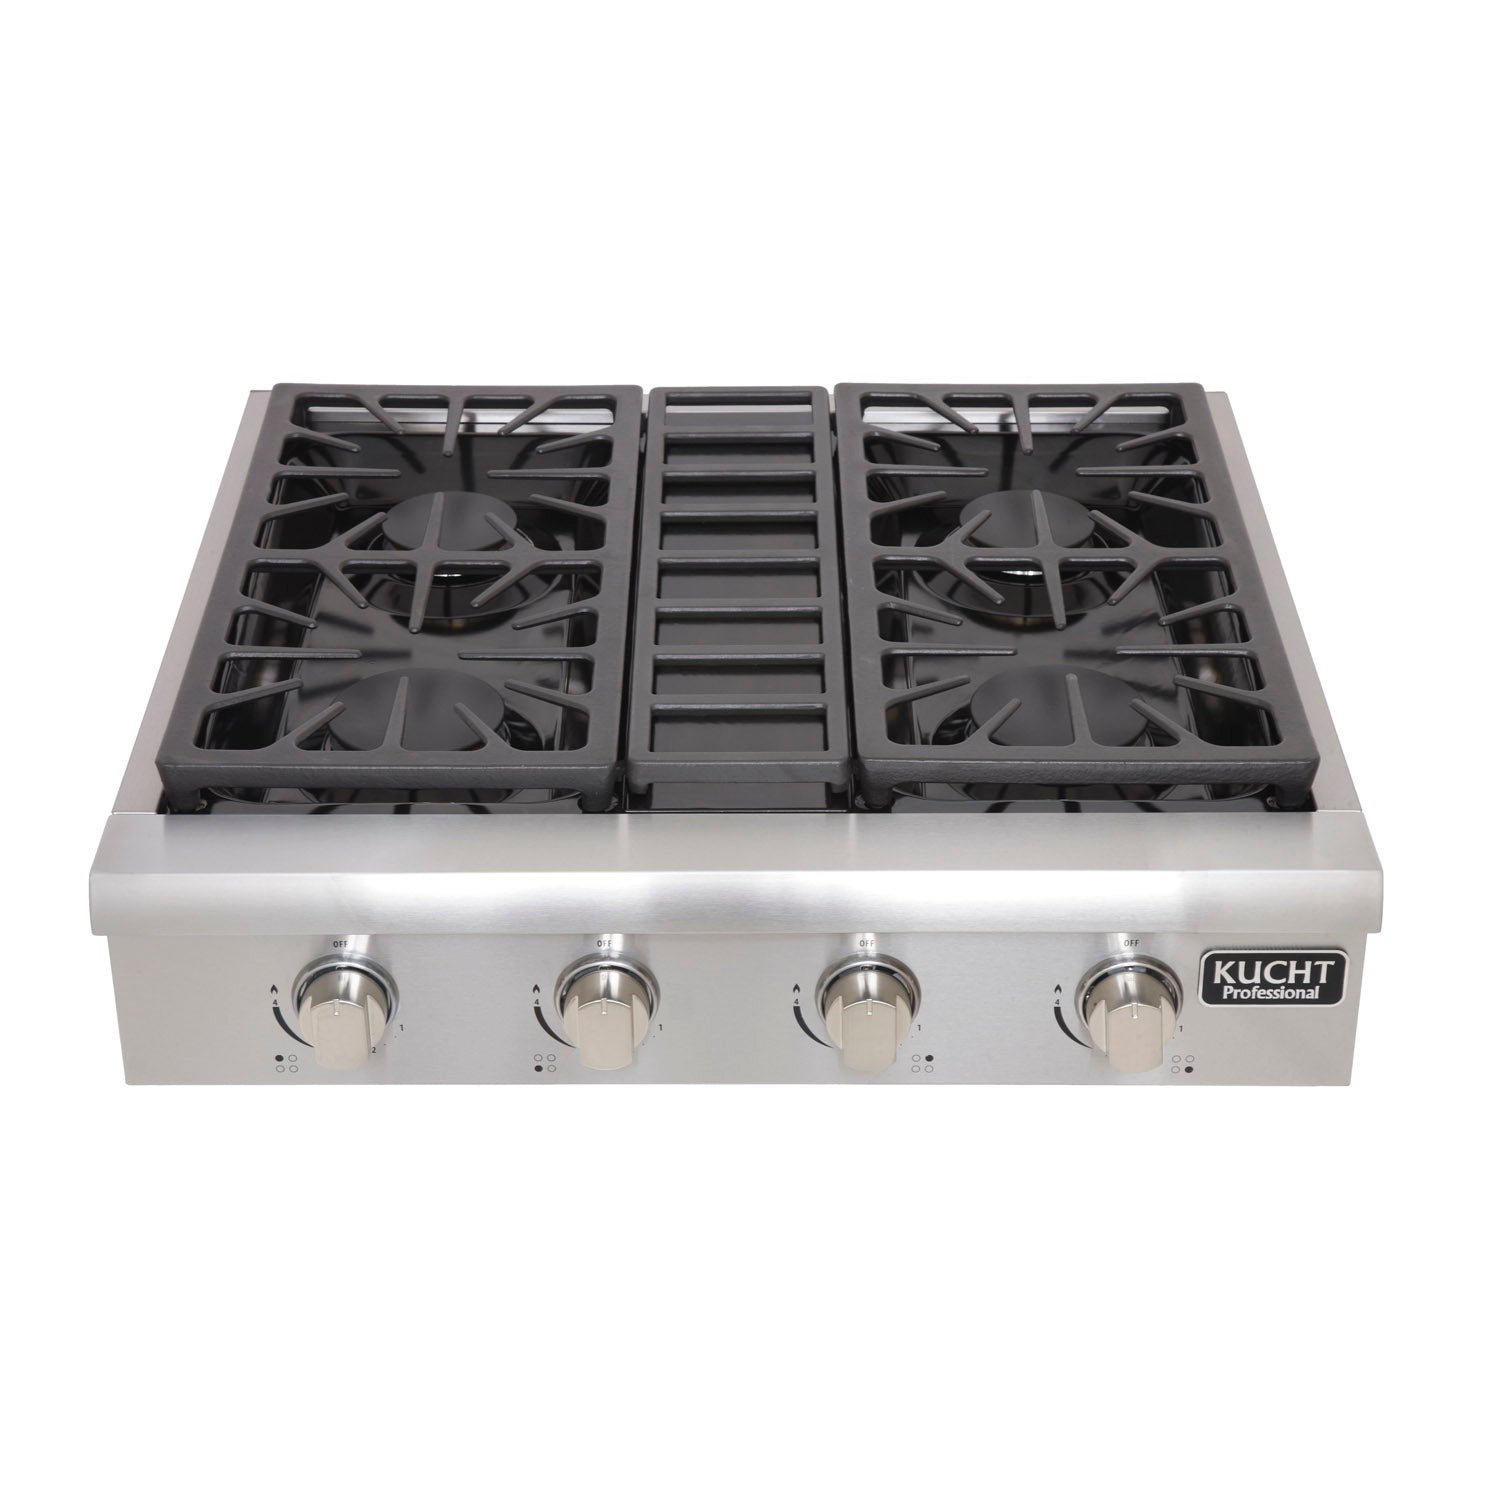 Kucht KRT Series 30" Natural Gas Range-Top With 4 Burners and Tuxedo Black Knobs